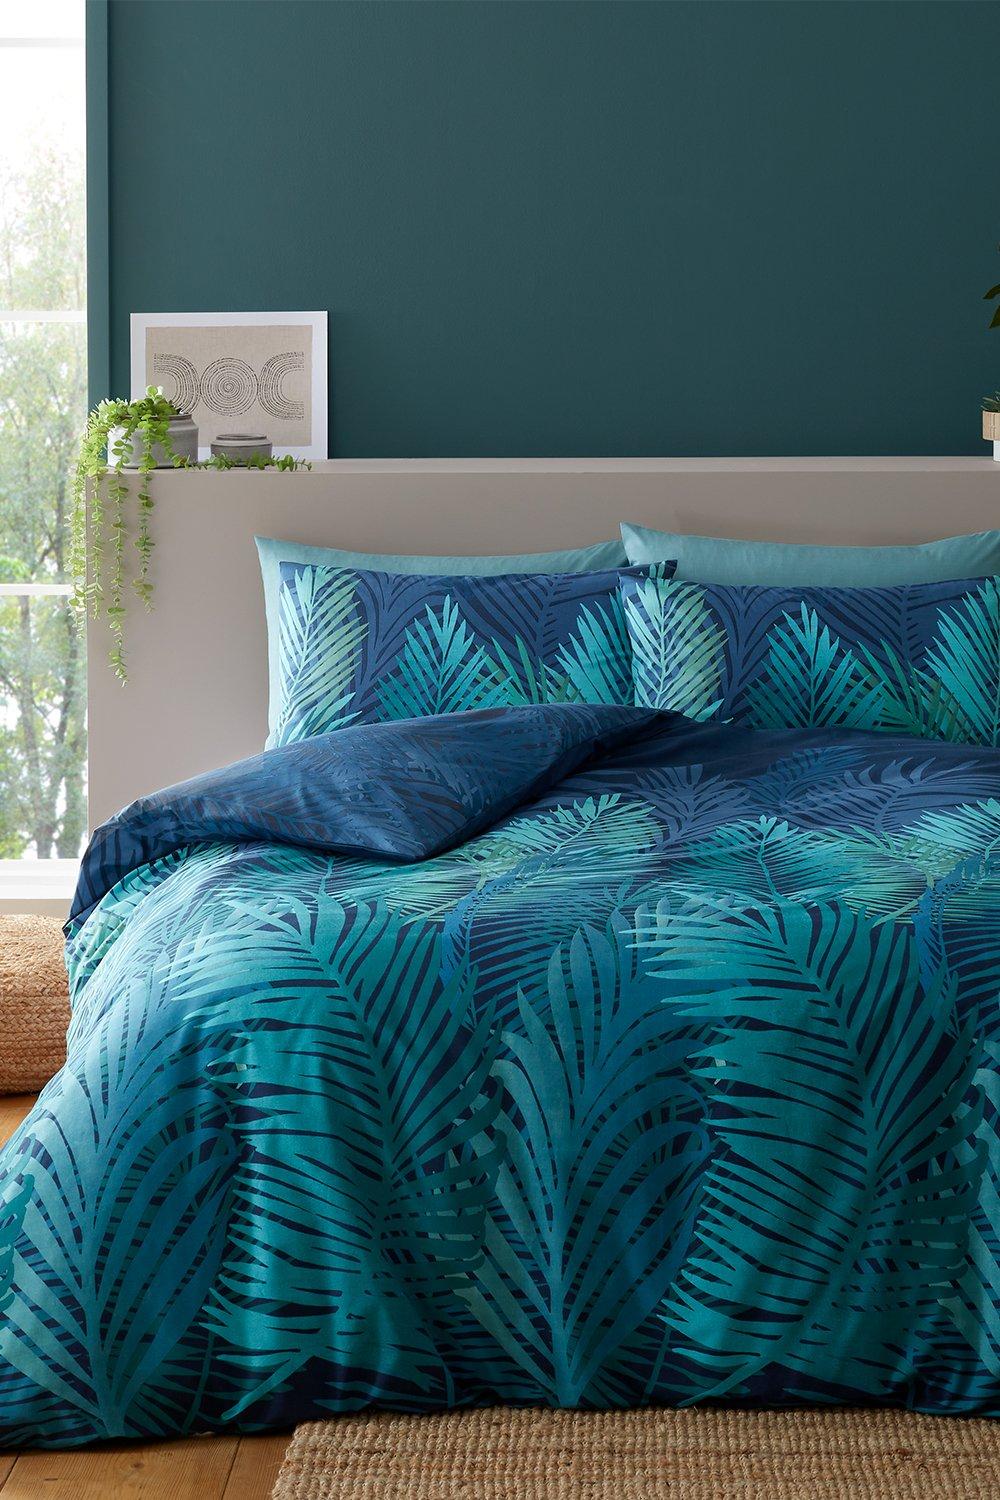 Bedding | 'Tropical Palm' Duvet Cover Set | Catherine Lansfield